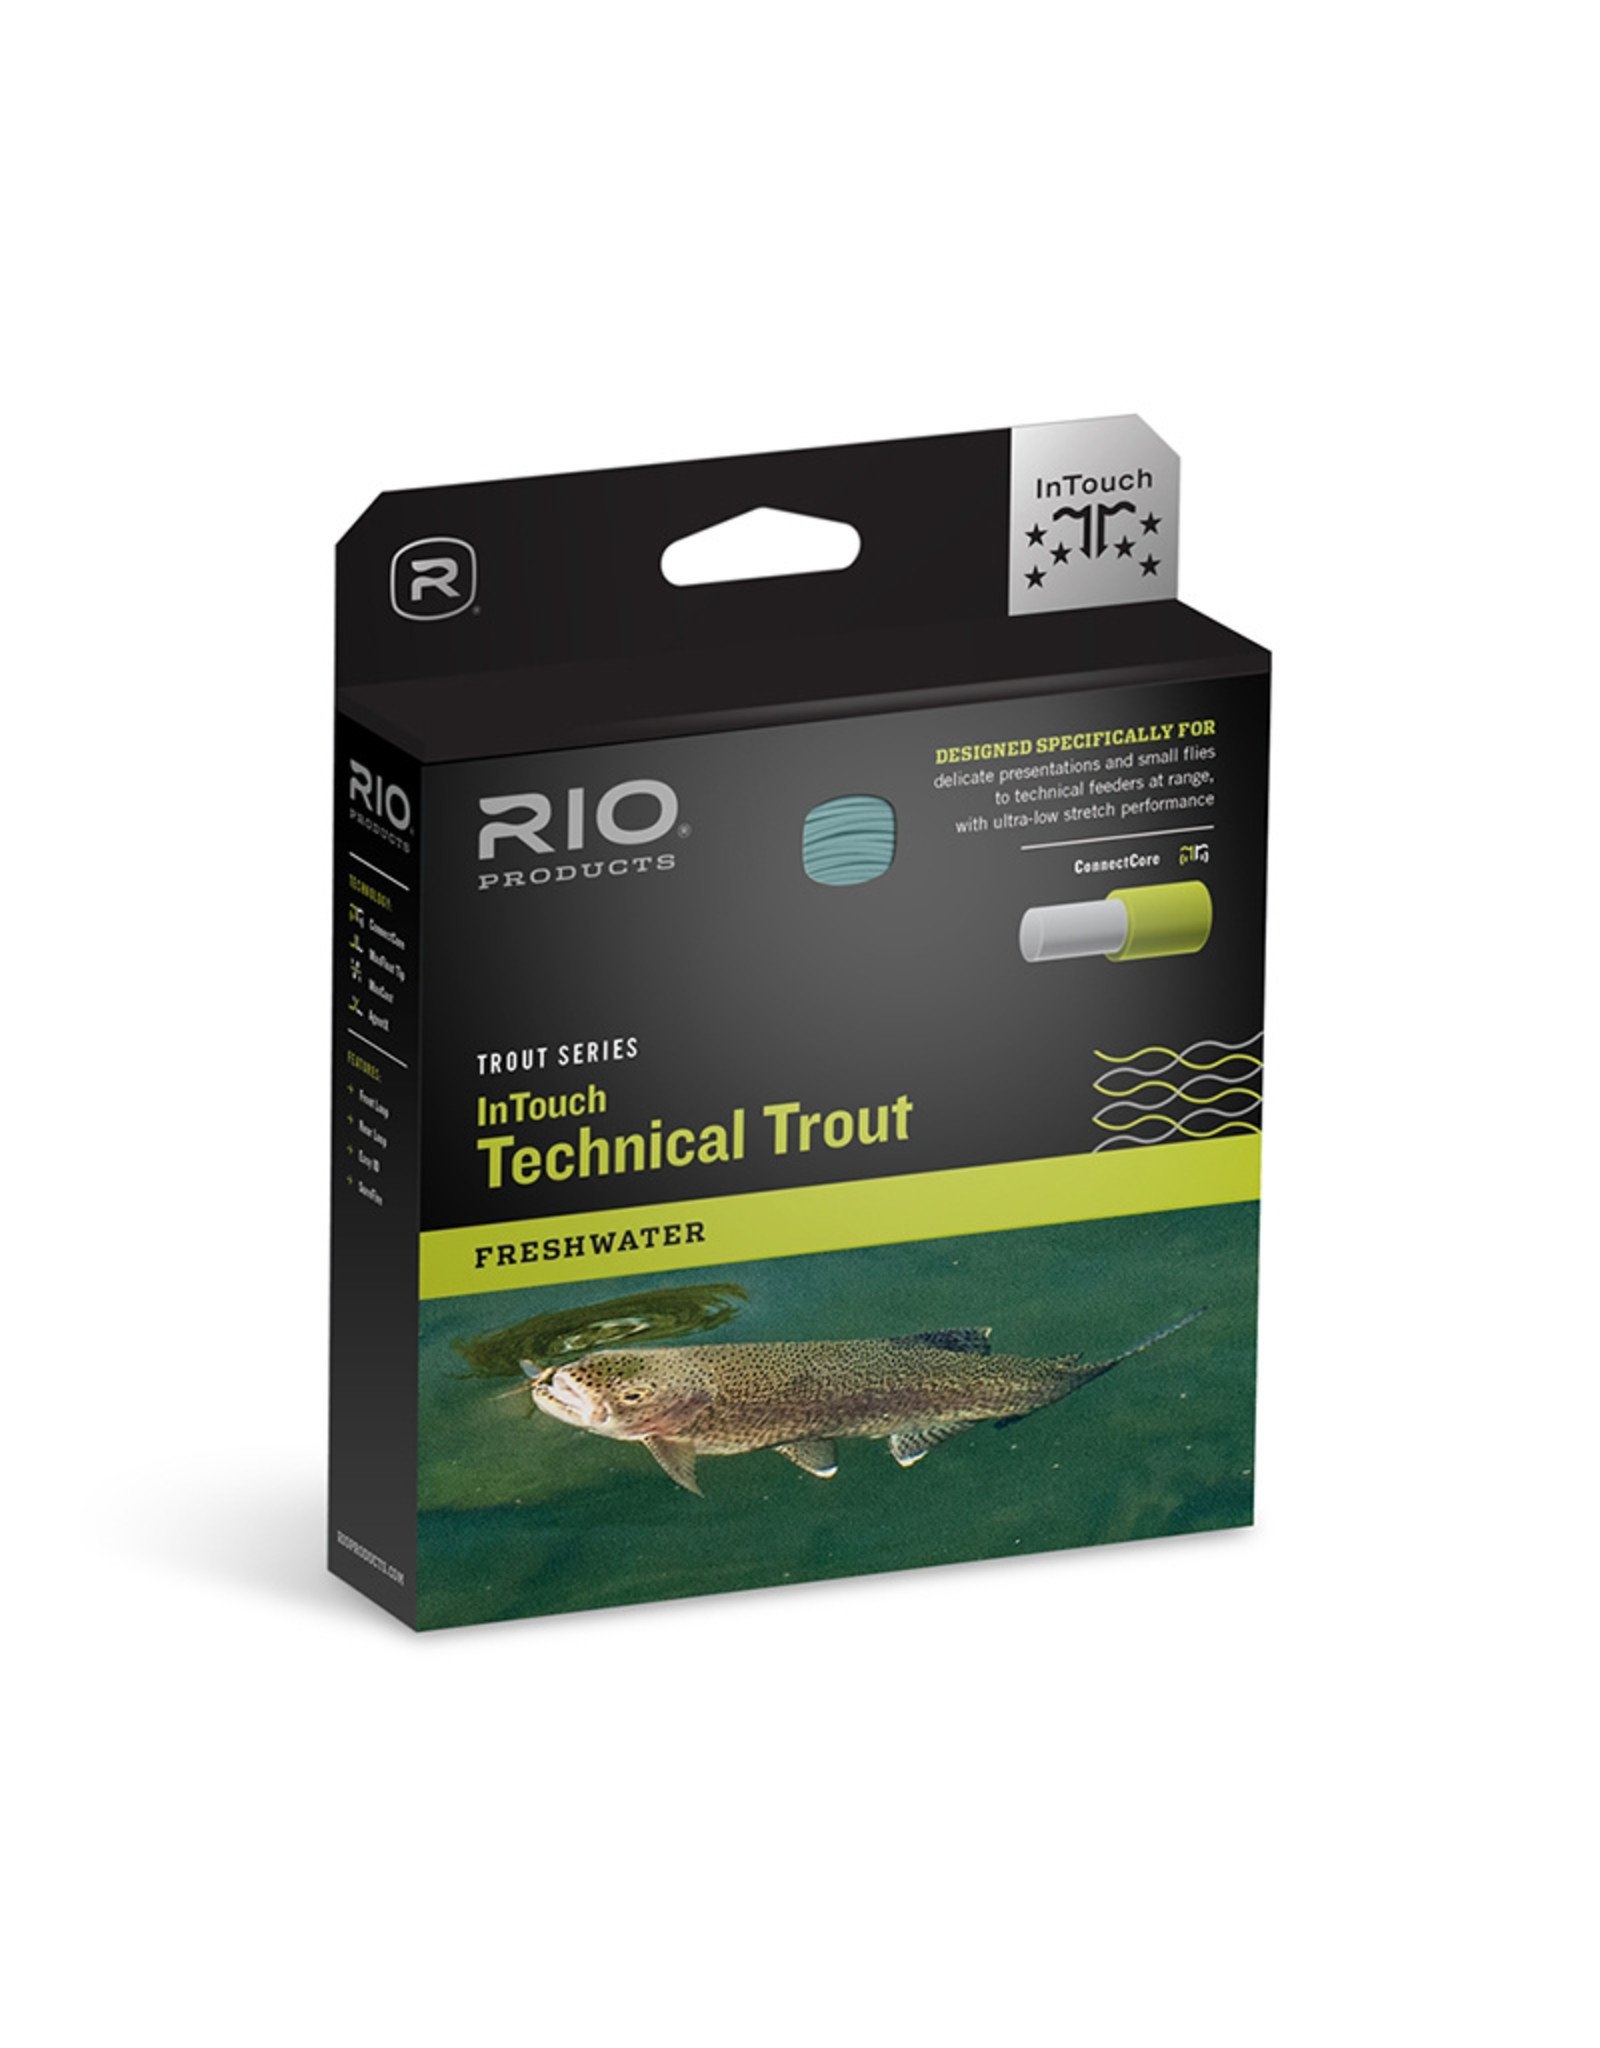 RIO Products InTouch Technical Trout